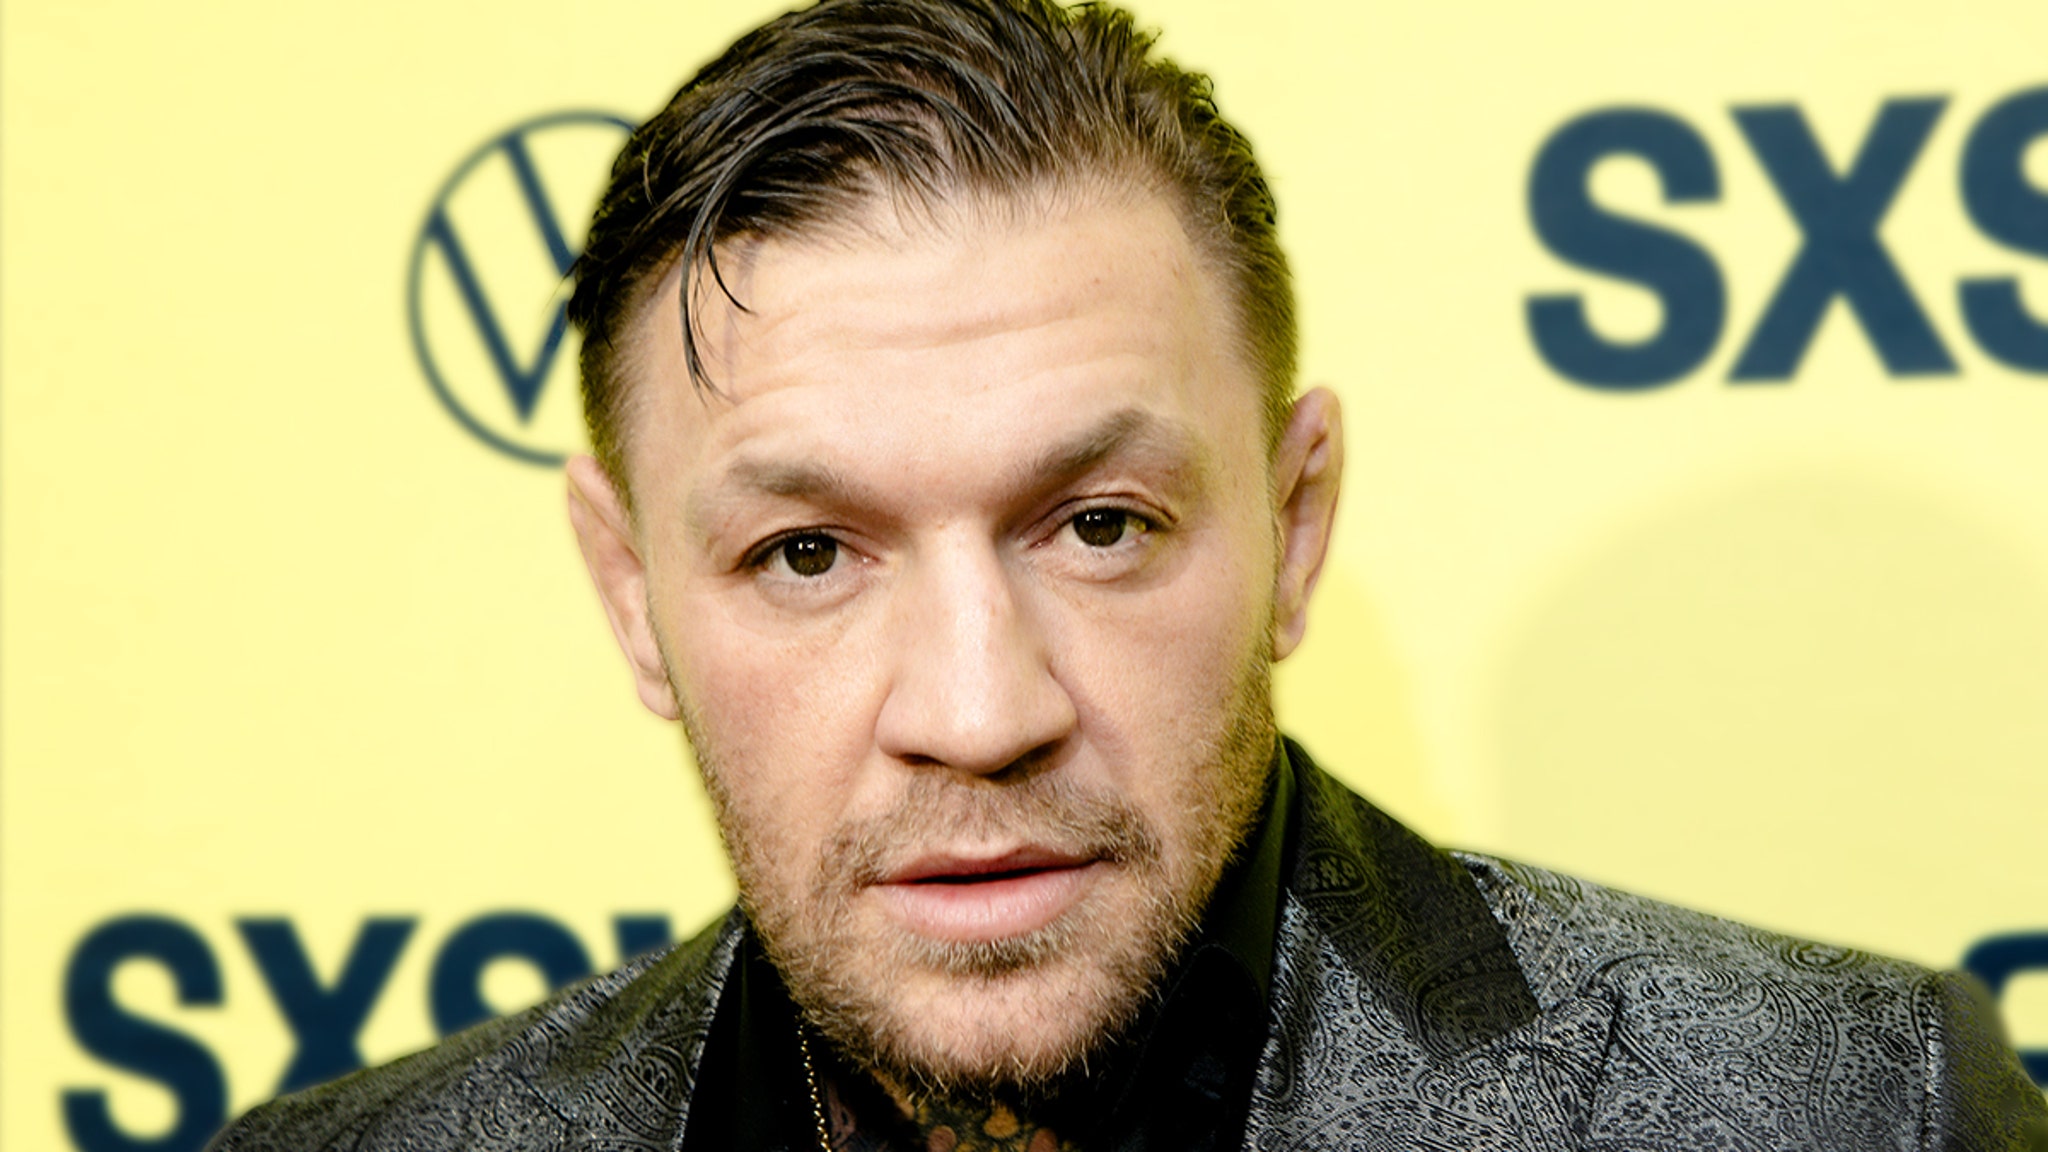 Conor McGregor Not In Rehab, Chael Sonnen's Claim 'Incorrect'